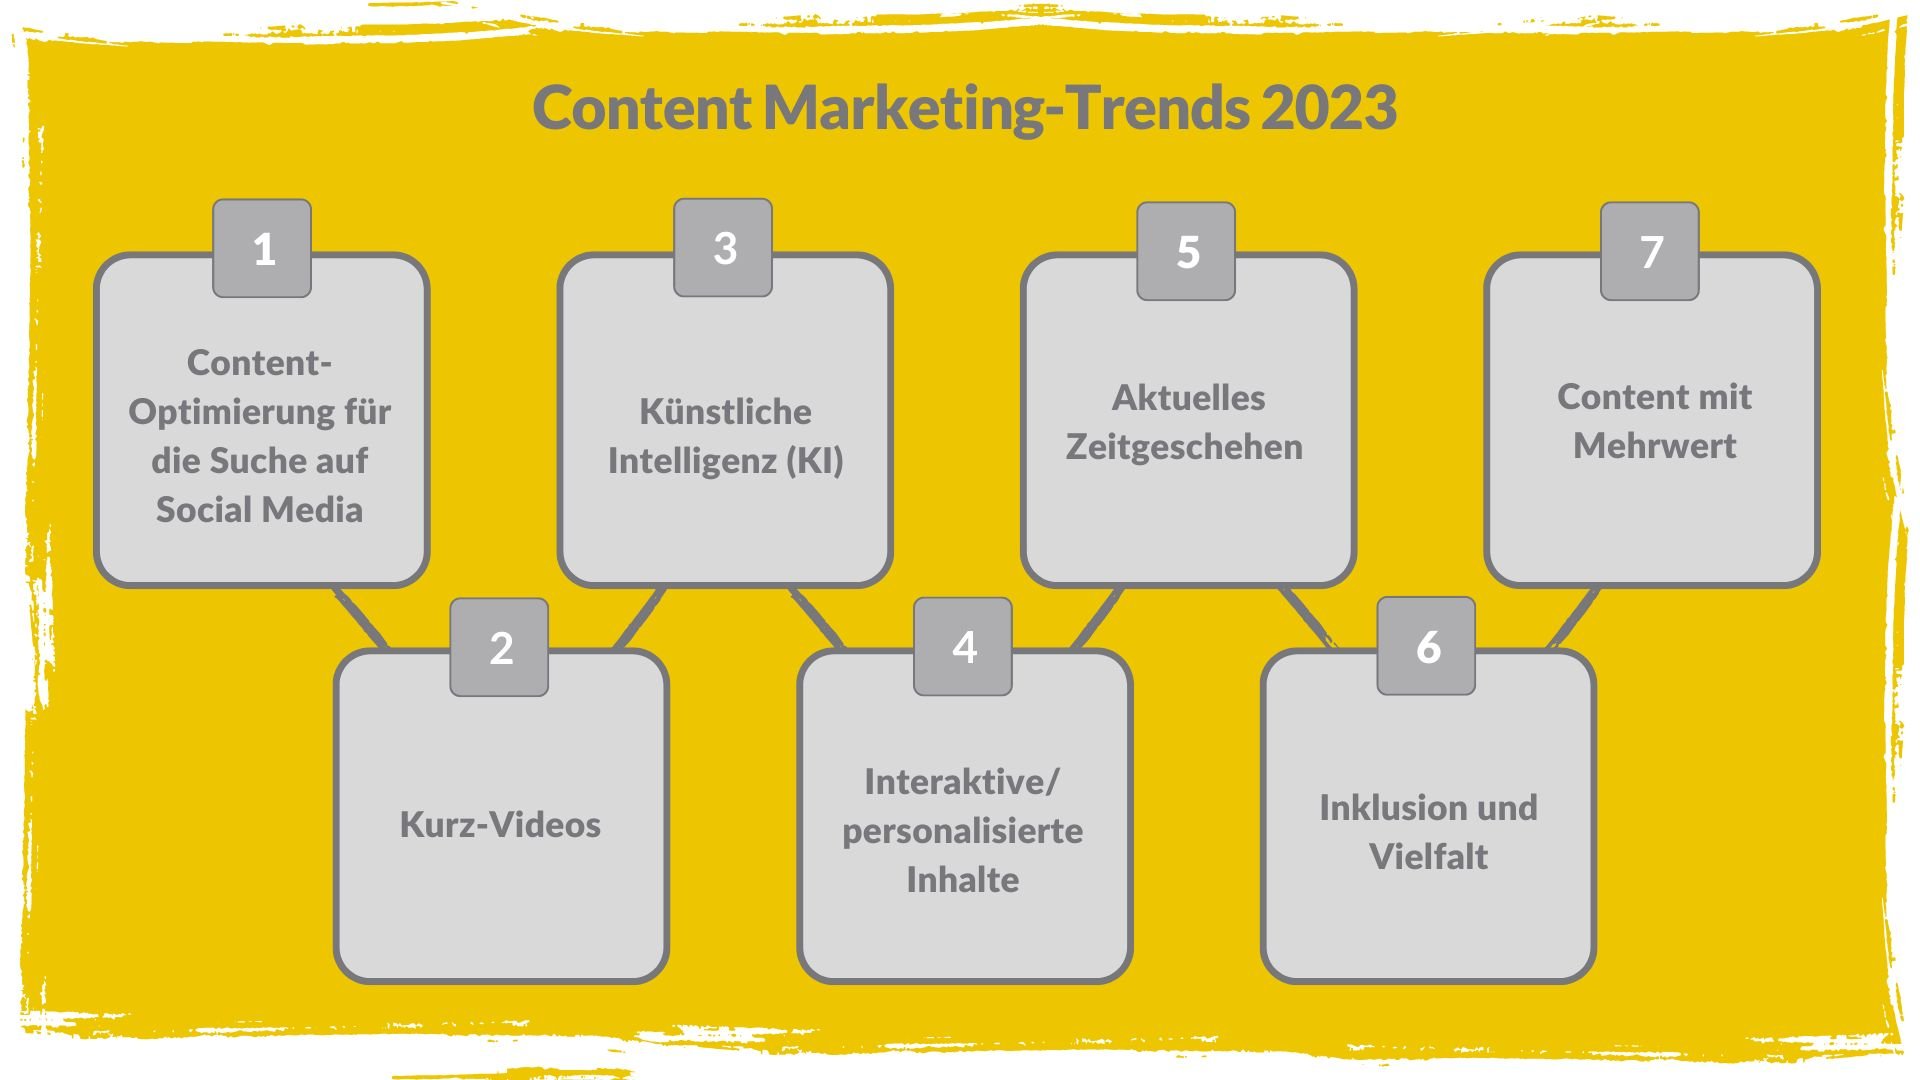 Content Marketing-Trends